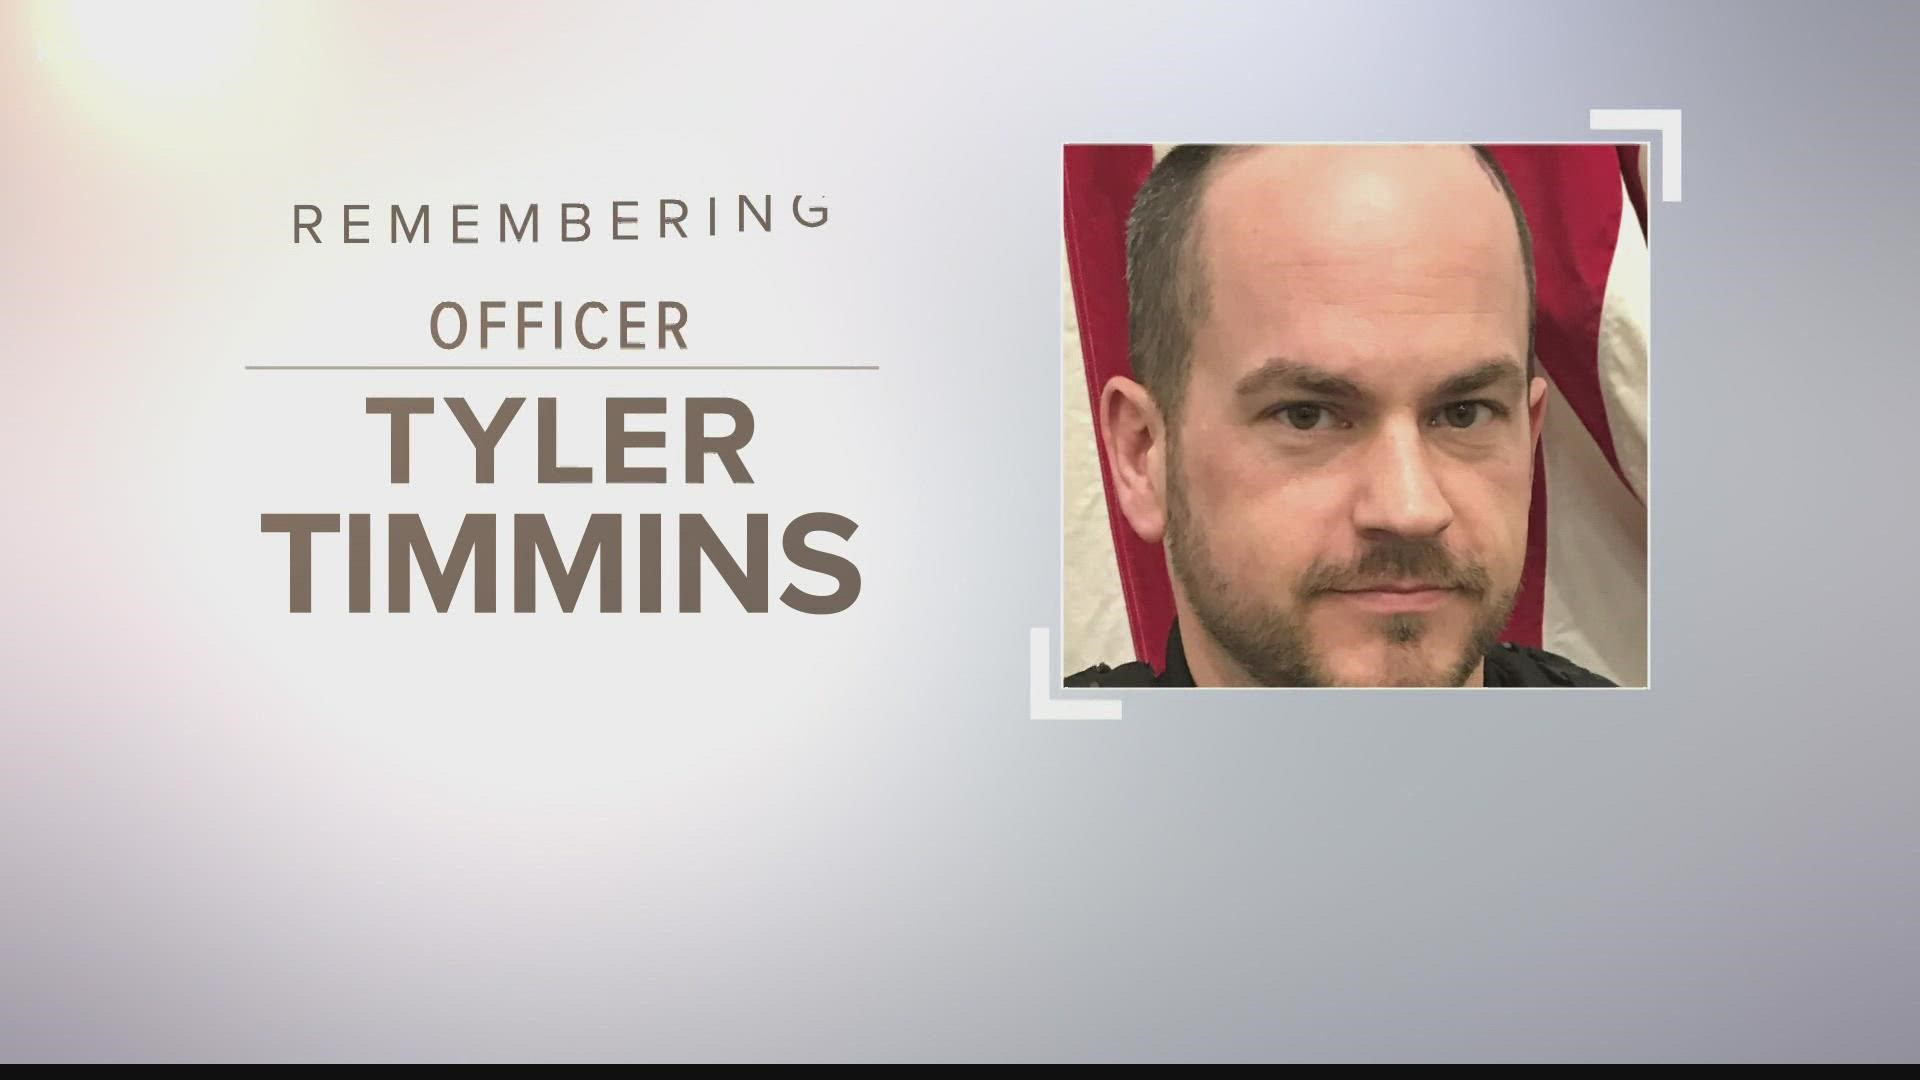 Officer Tyler Timmins was shot and killed in the line of duty on Tuesday.